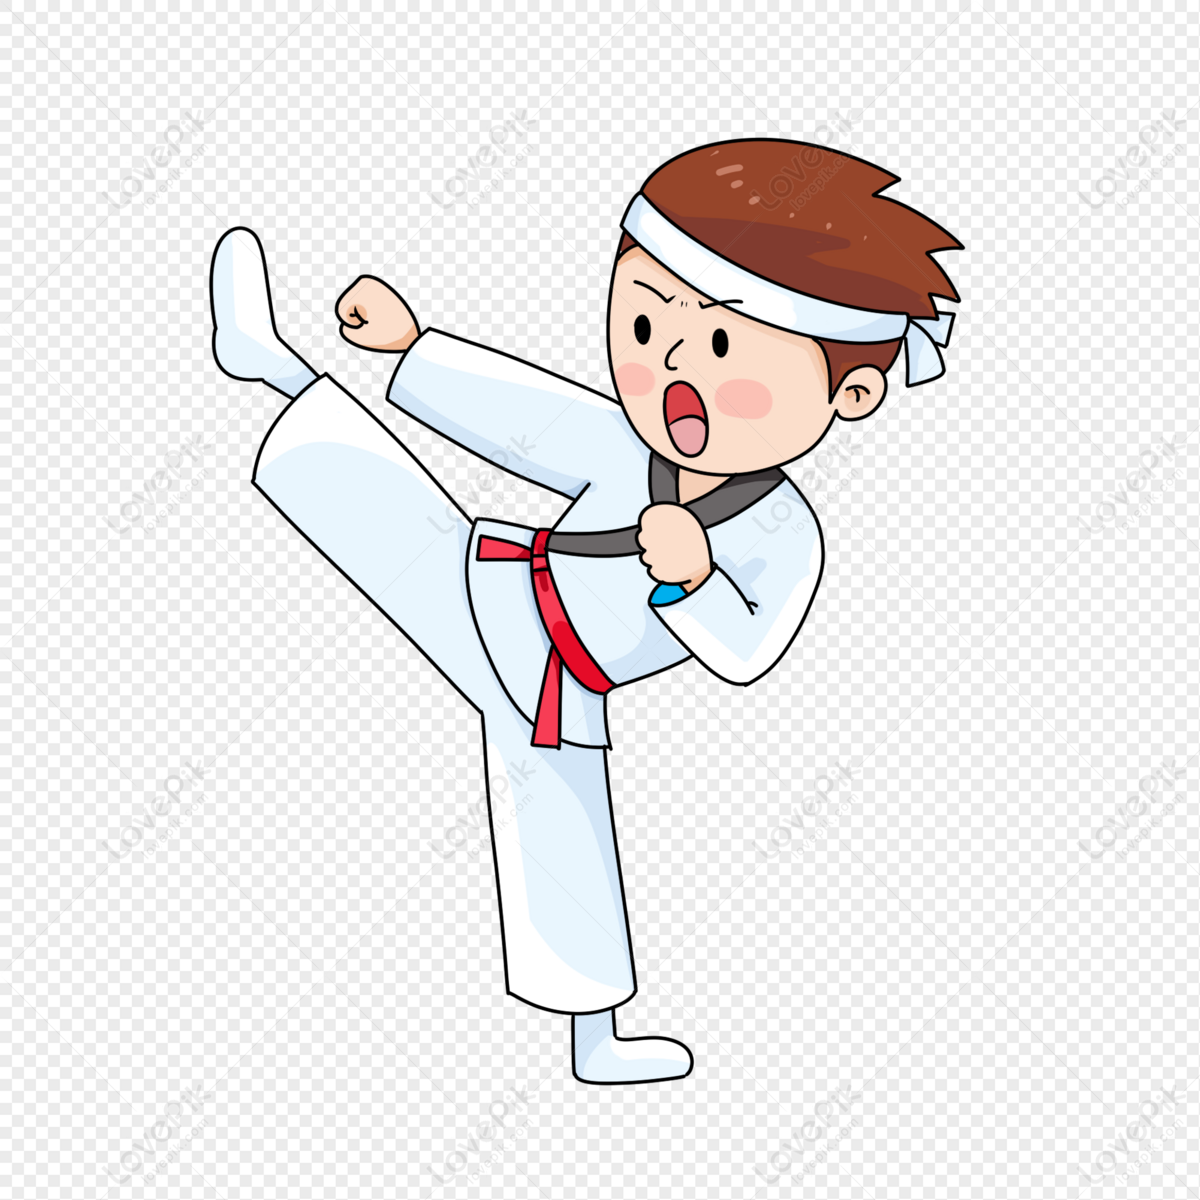 Taekwondo Cartoon Boy PNG Image Free Download And Clipart Image For Free  Download - Lovepik | 401480741